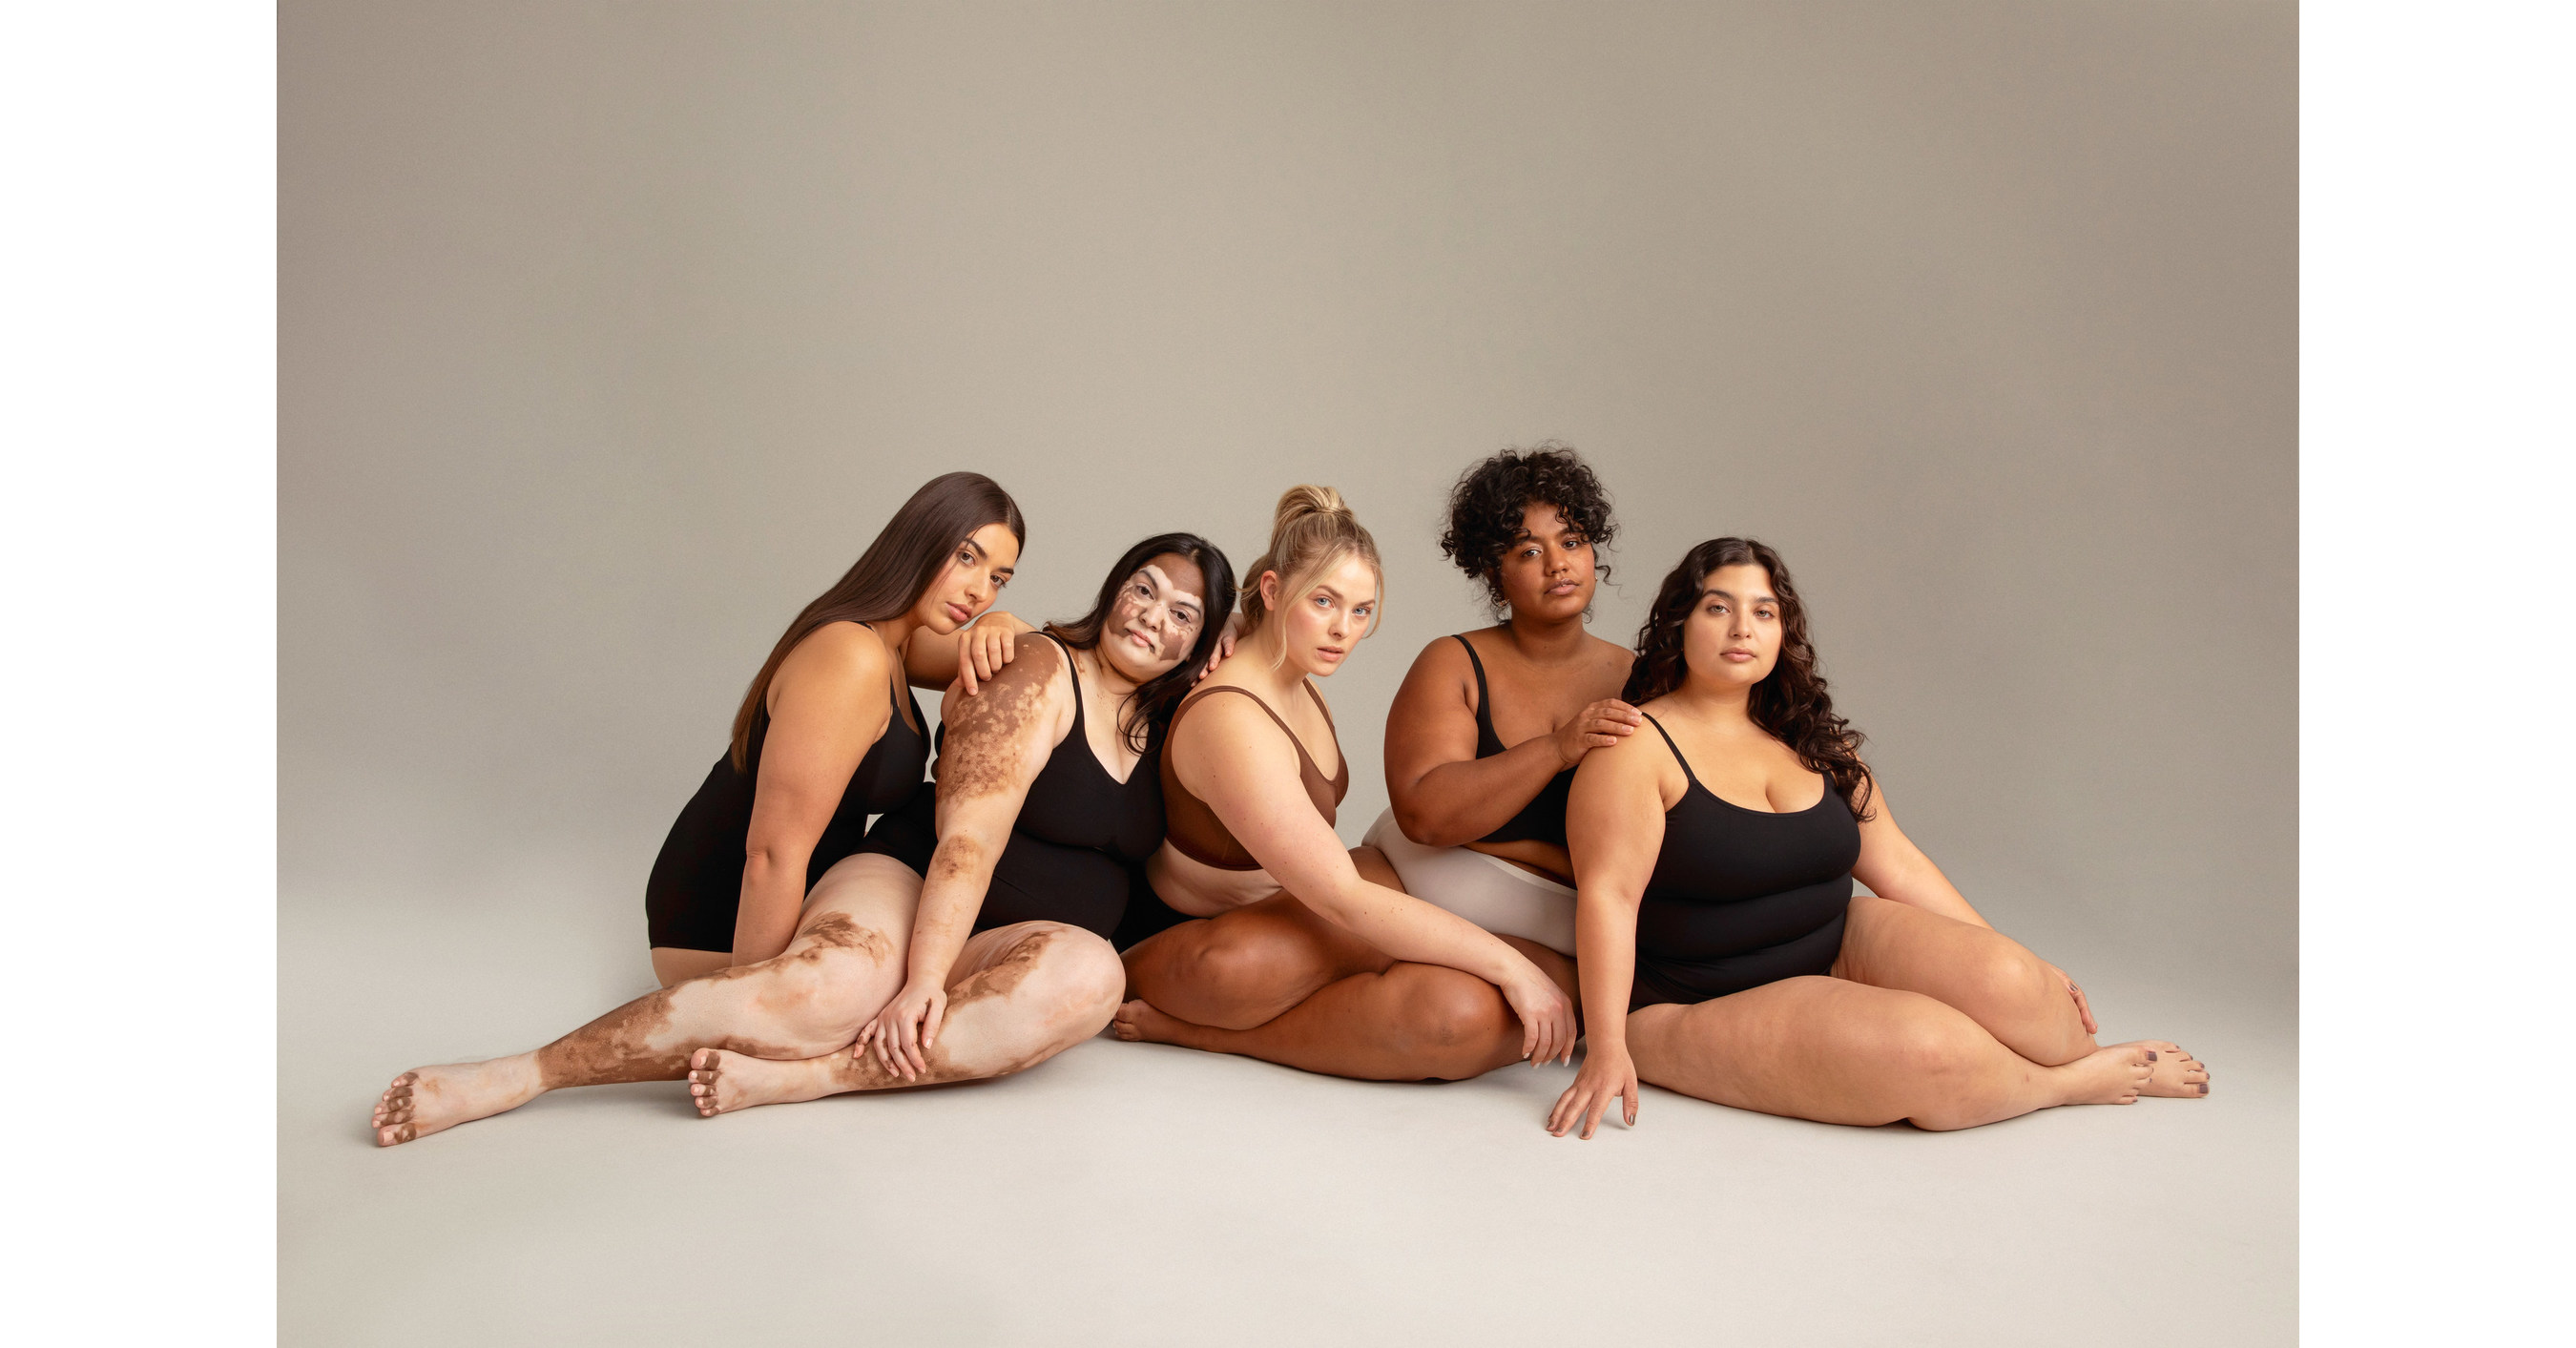 Shapermint Celebrates Real Women in New Step into Self Love Campaign